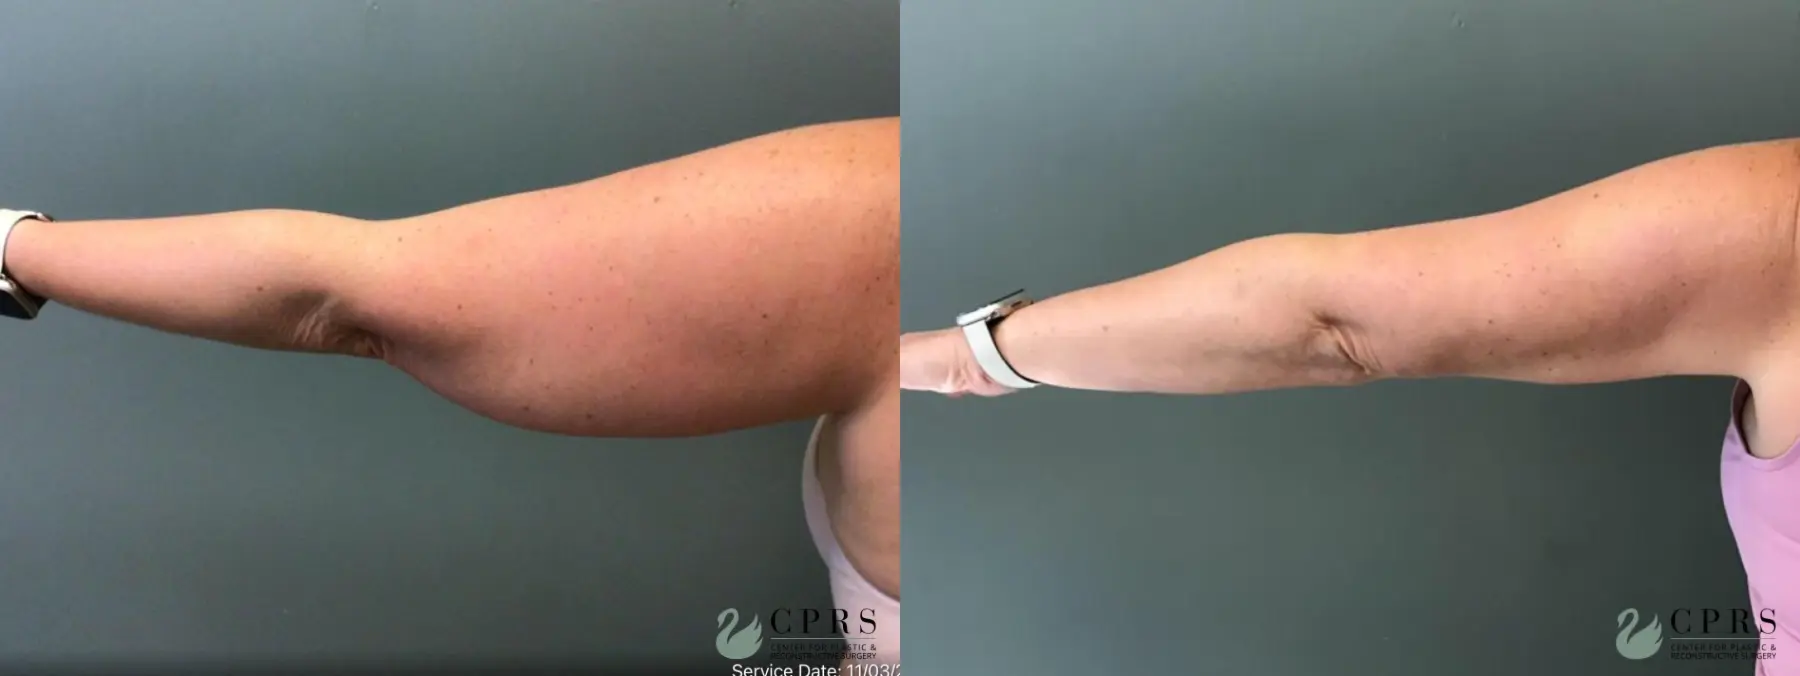 Liposuction: Patient 21 - Before and After 2